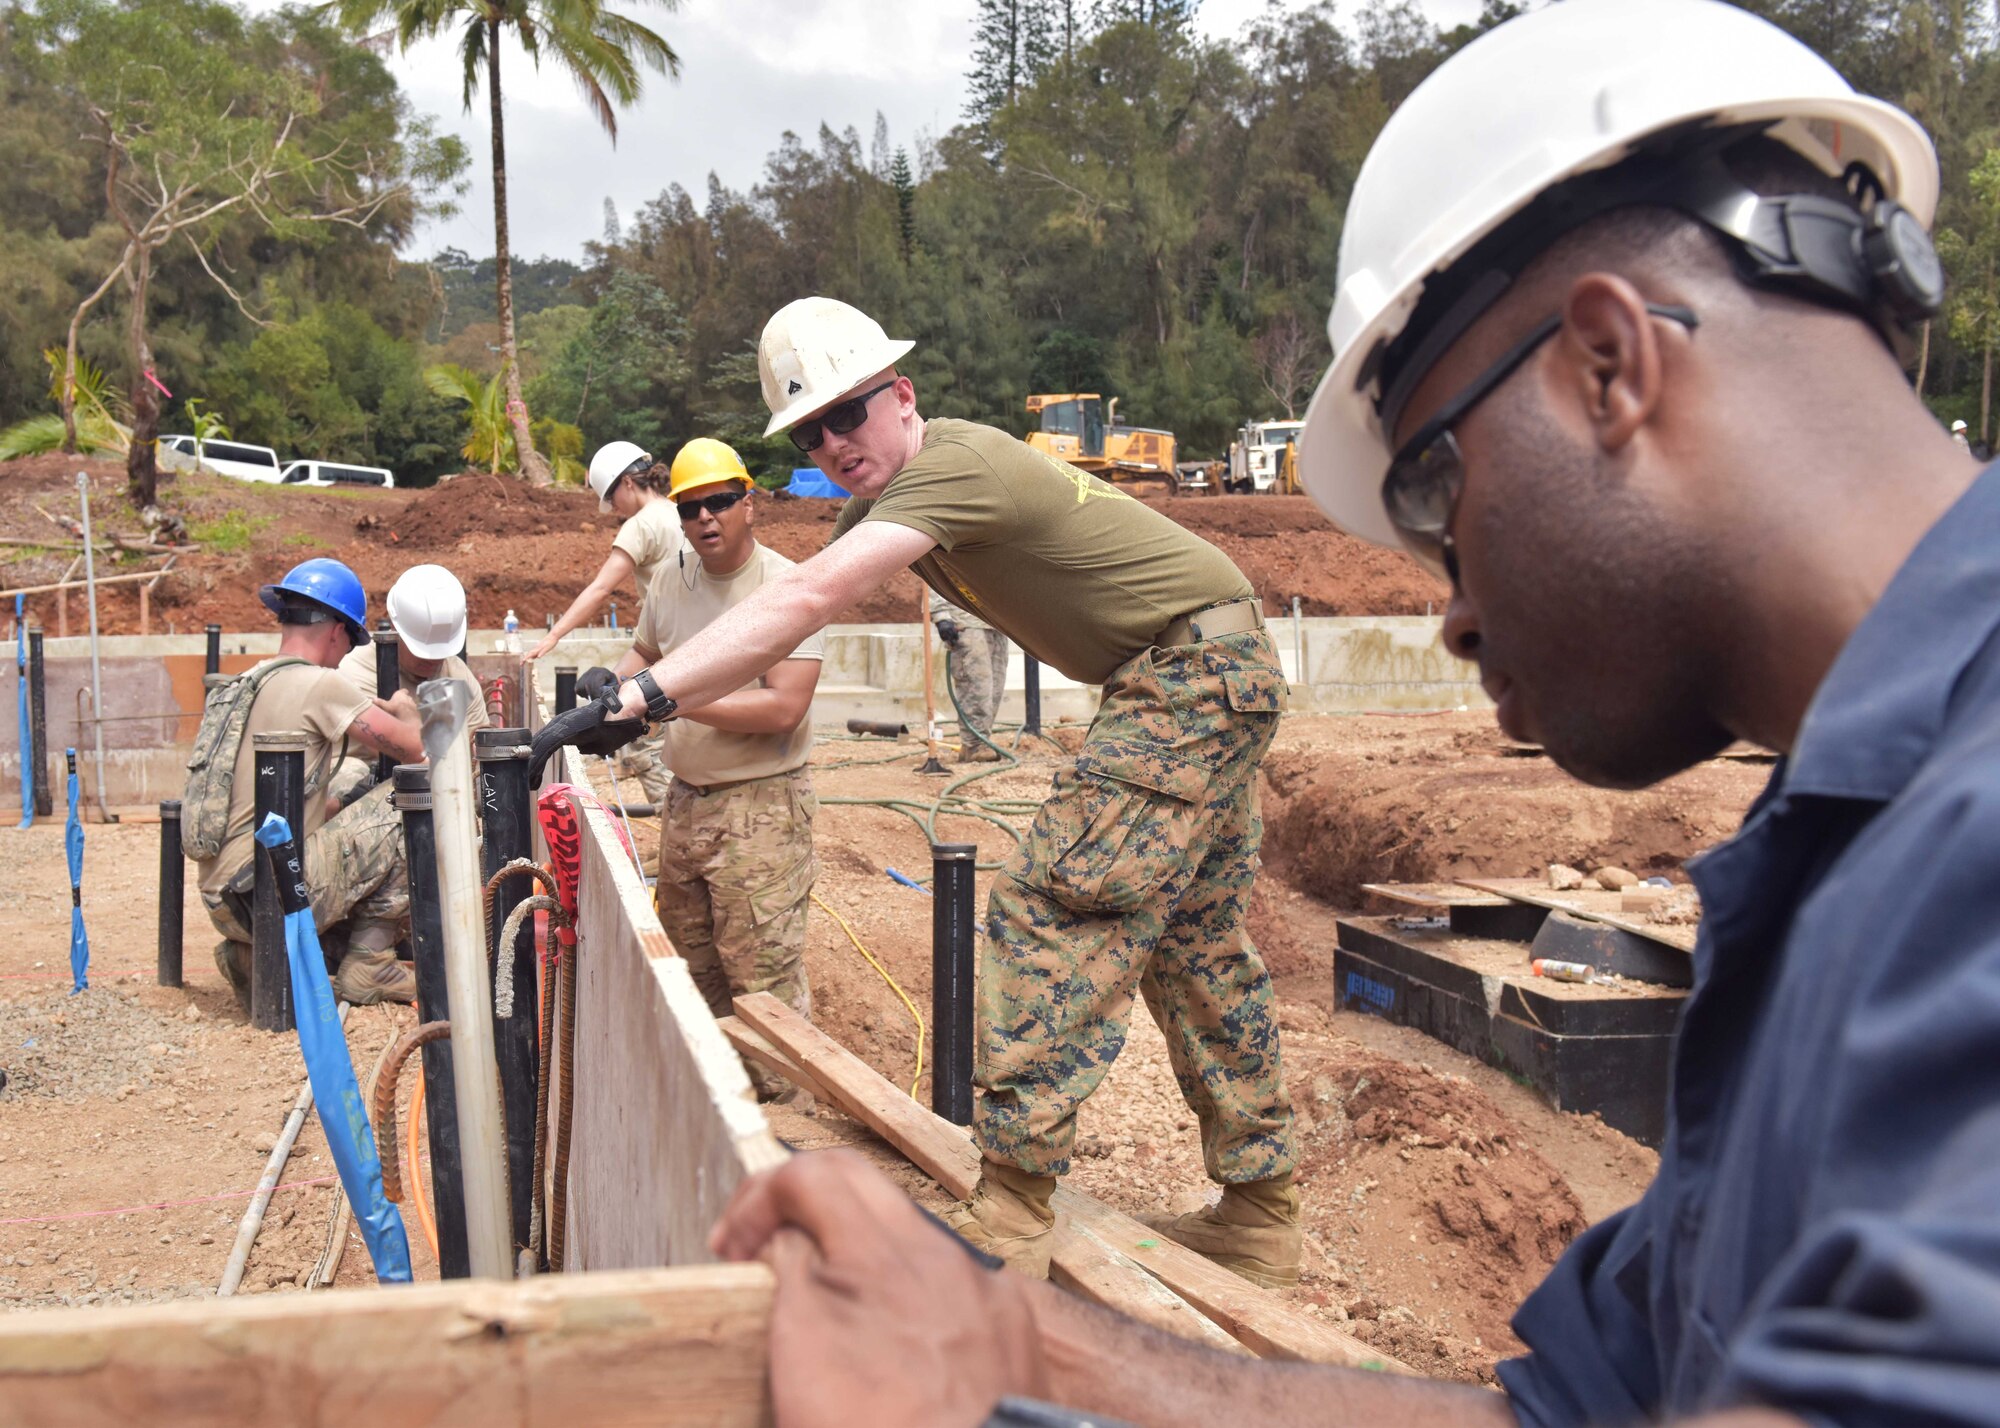 Over 50 service members from the U.S. Air Force and Marine Corps Reserve and Air National Guard who participated in an Innovative Readiness Training project May 18 through June 1.